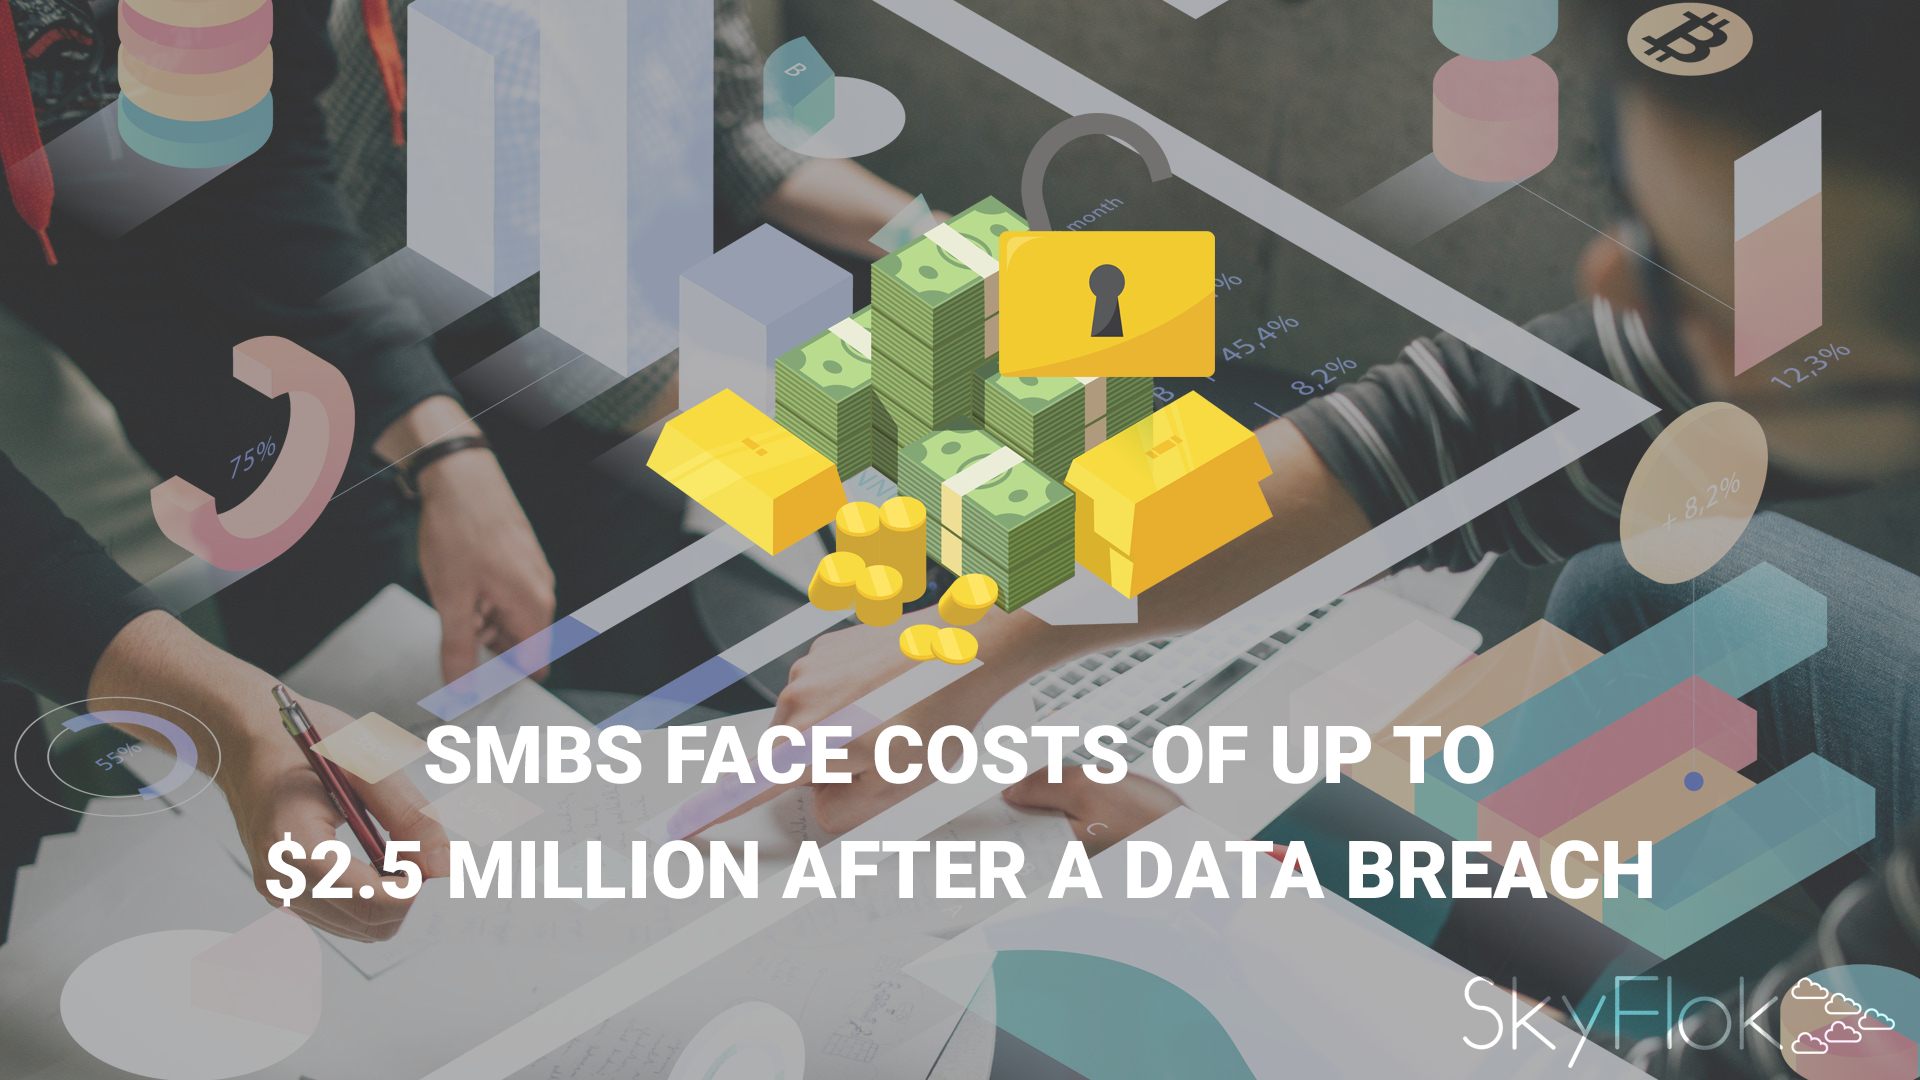 You are currently viewing SMBs face costs of up to $2.5 million after a data breach